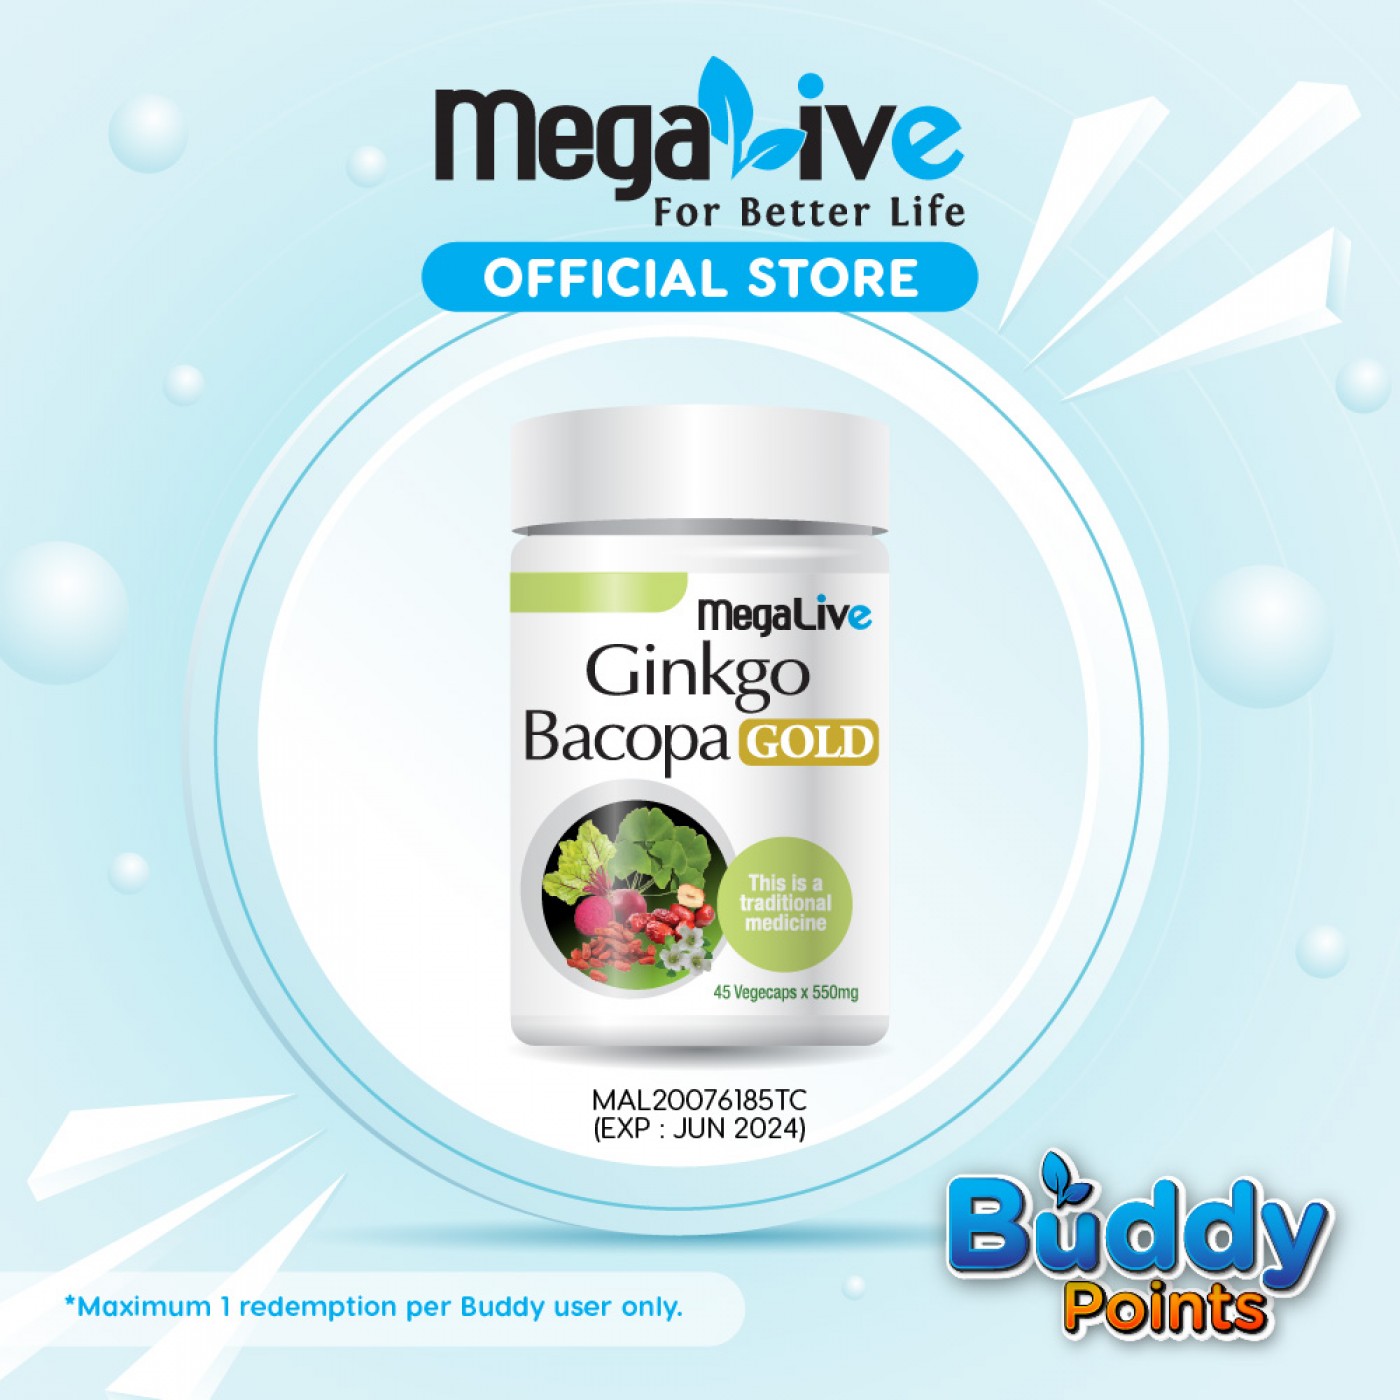 MegaLive Ginkgo Bacopa Gold